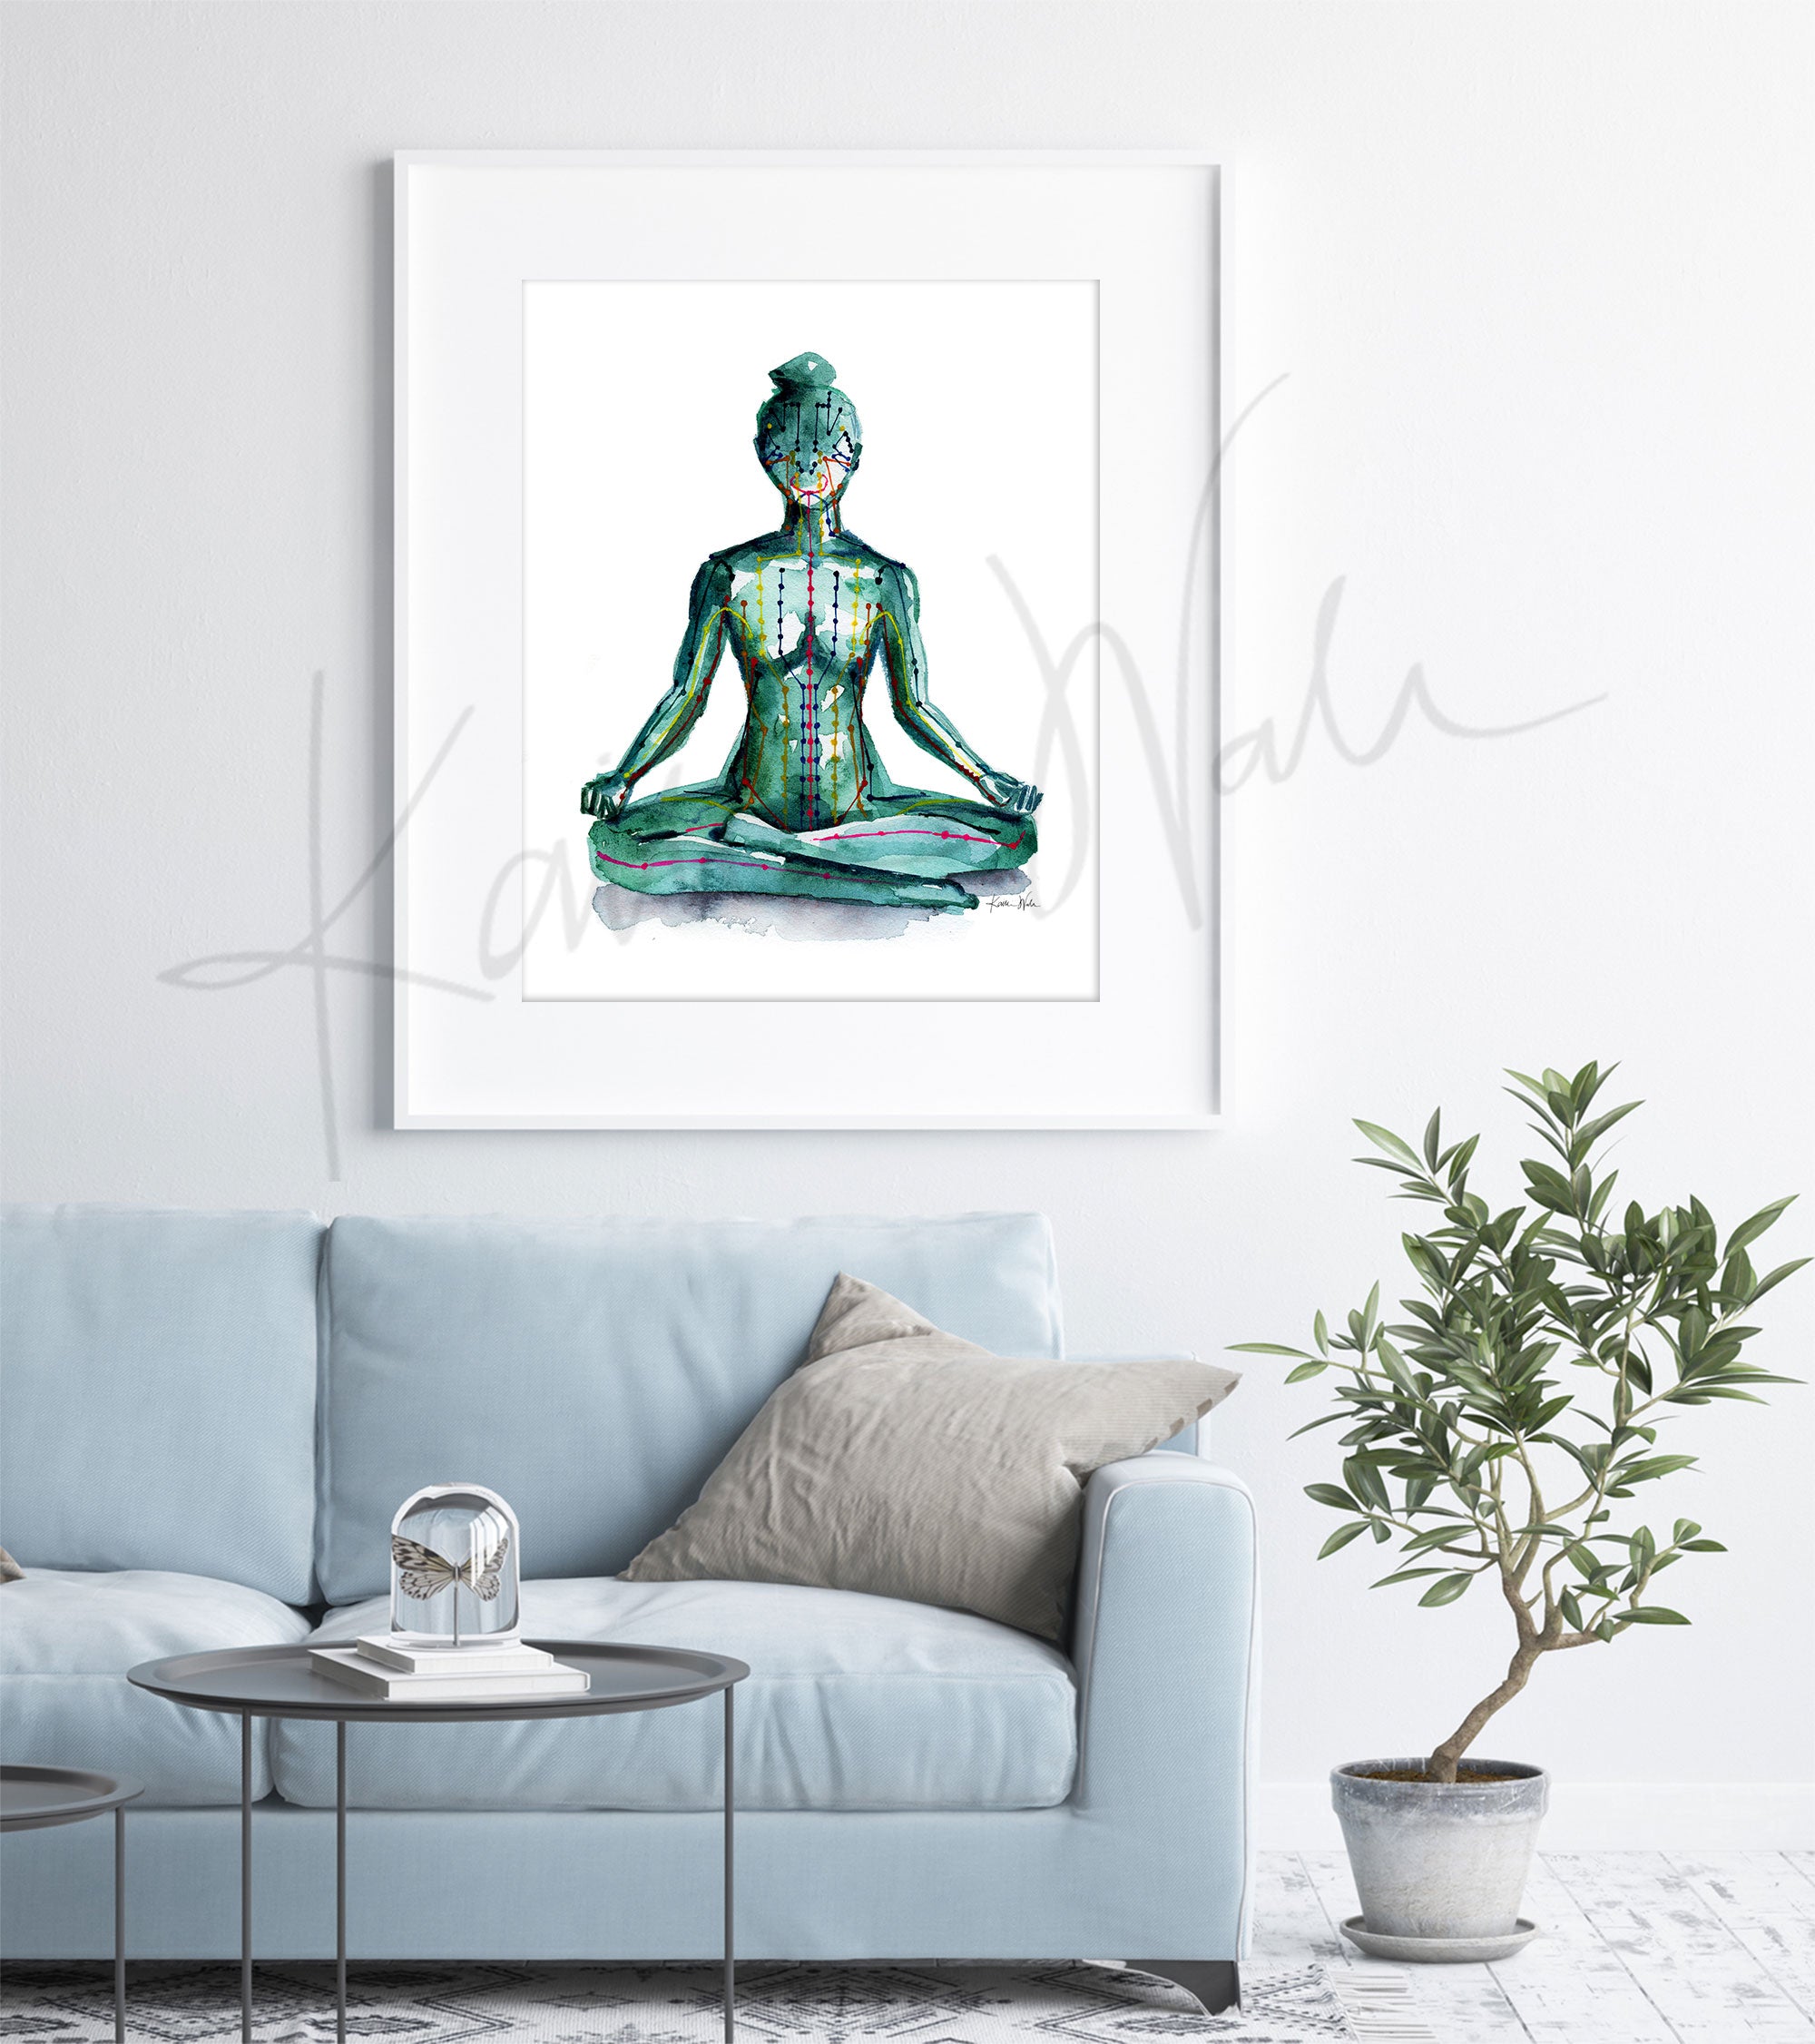 Framed watercolor painting of a person sitting in a meditative pose with meridian paths showing. The painting is hanging over a blue couch.